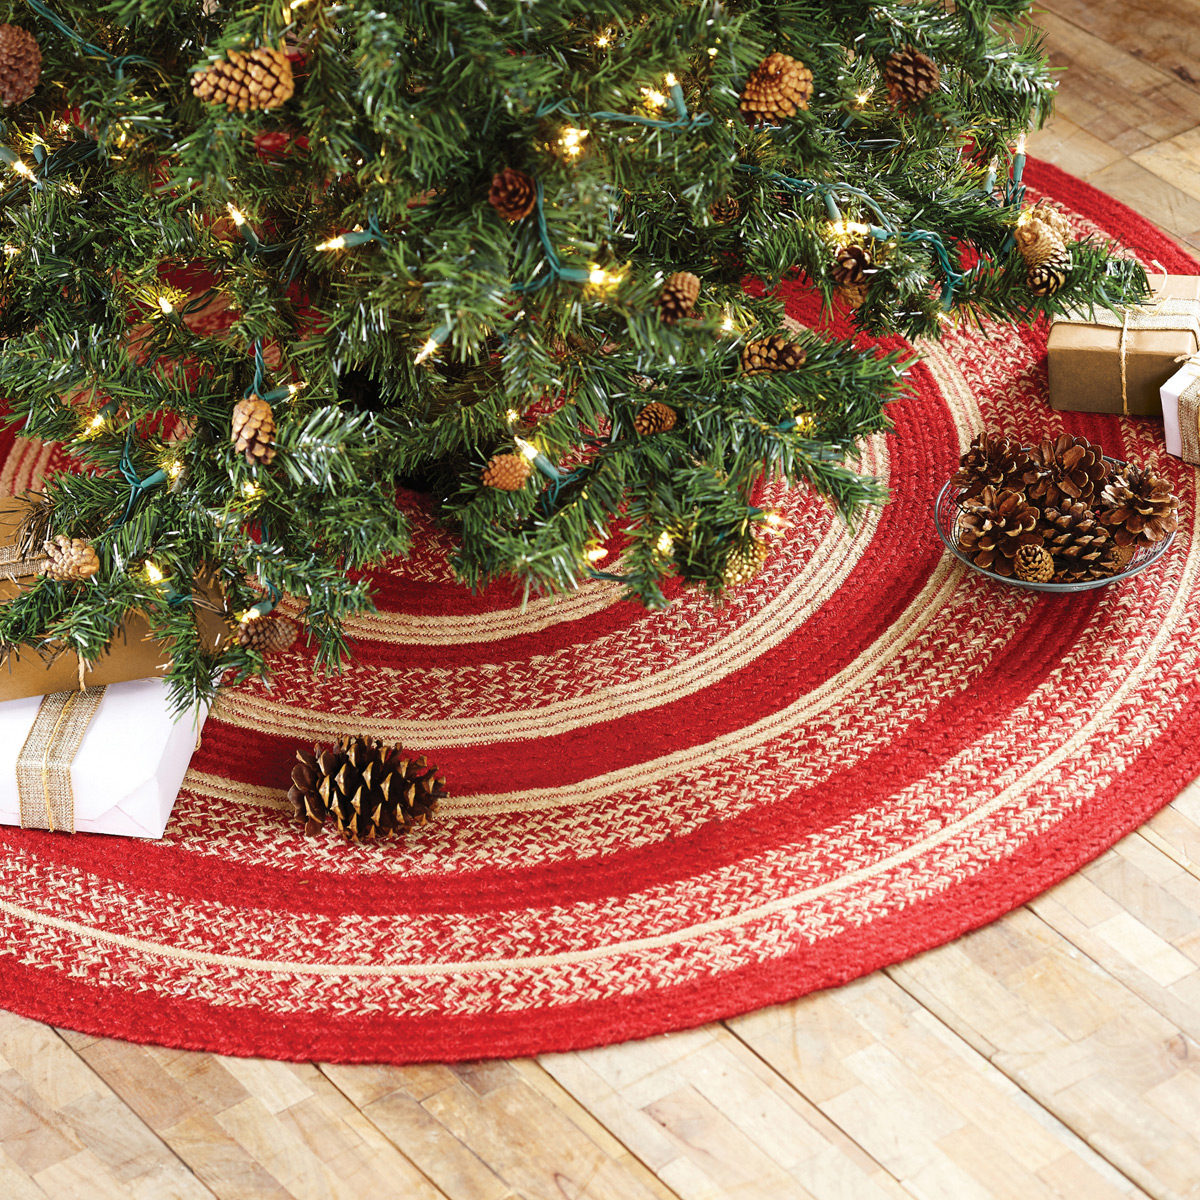 Cunningham Red Braided Tree Skirt - The Weed Patch